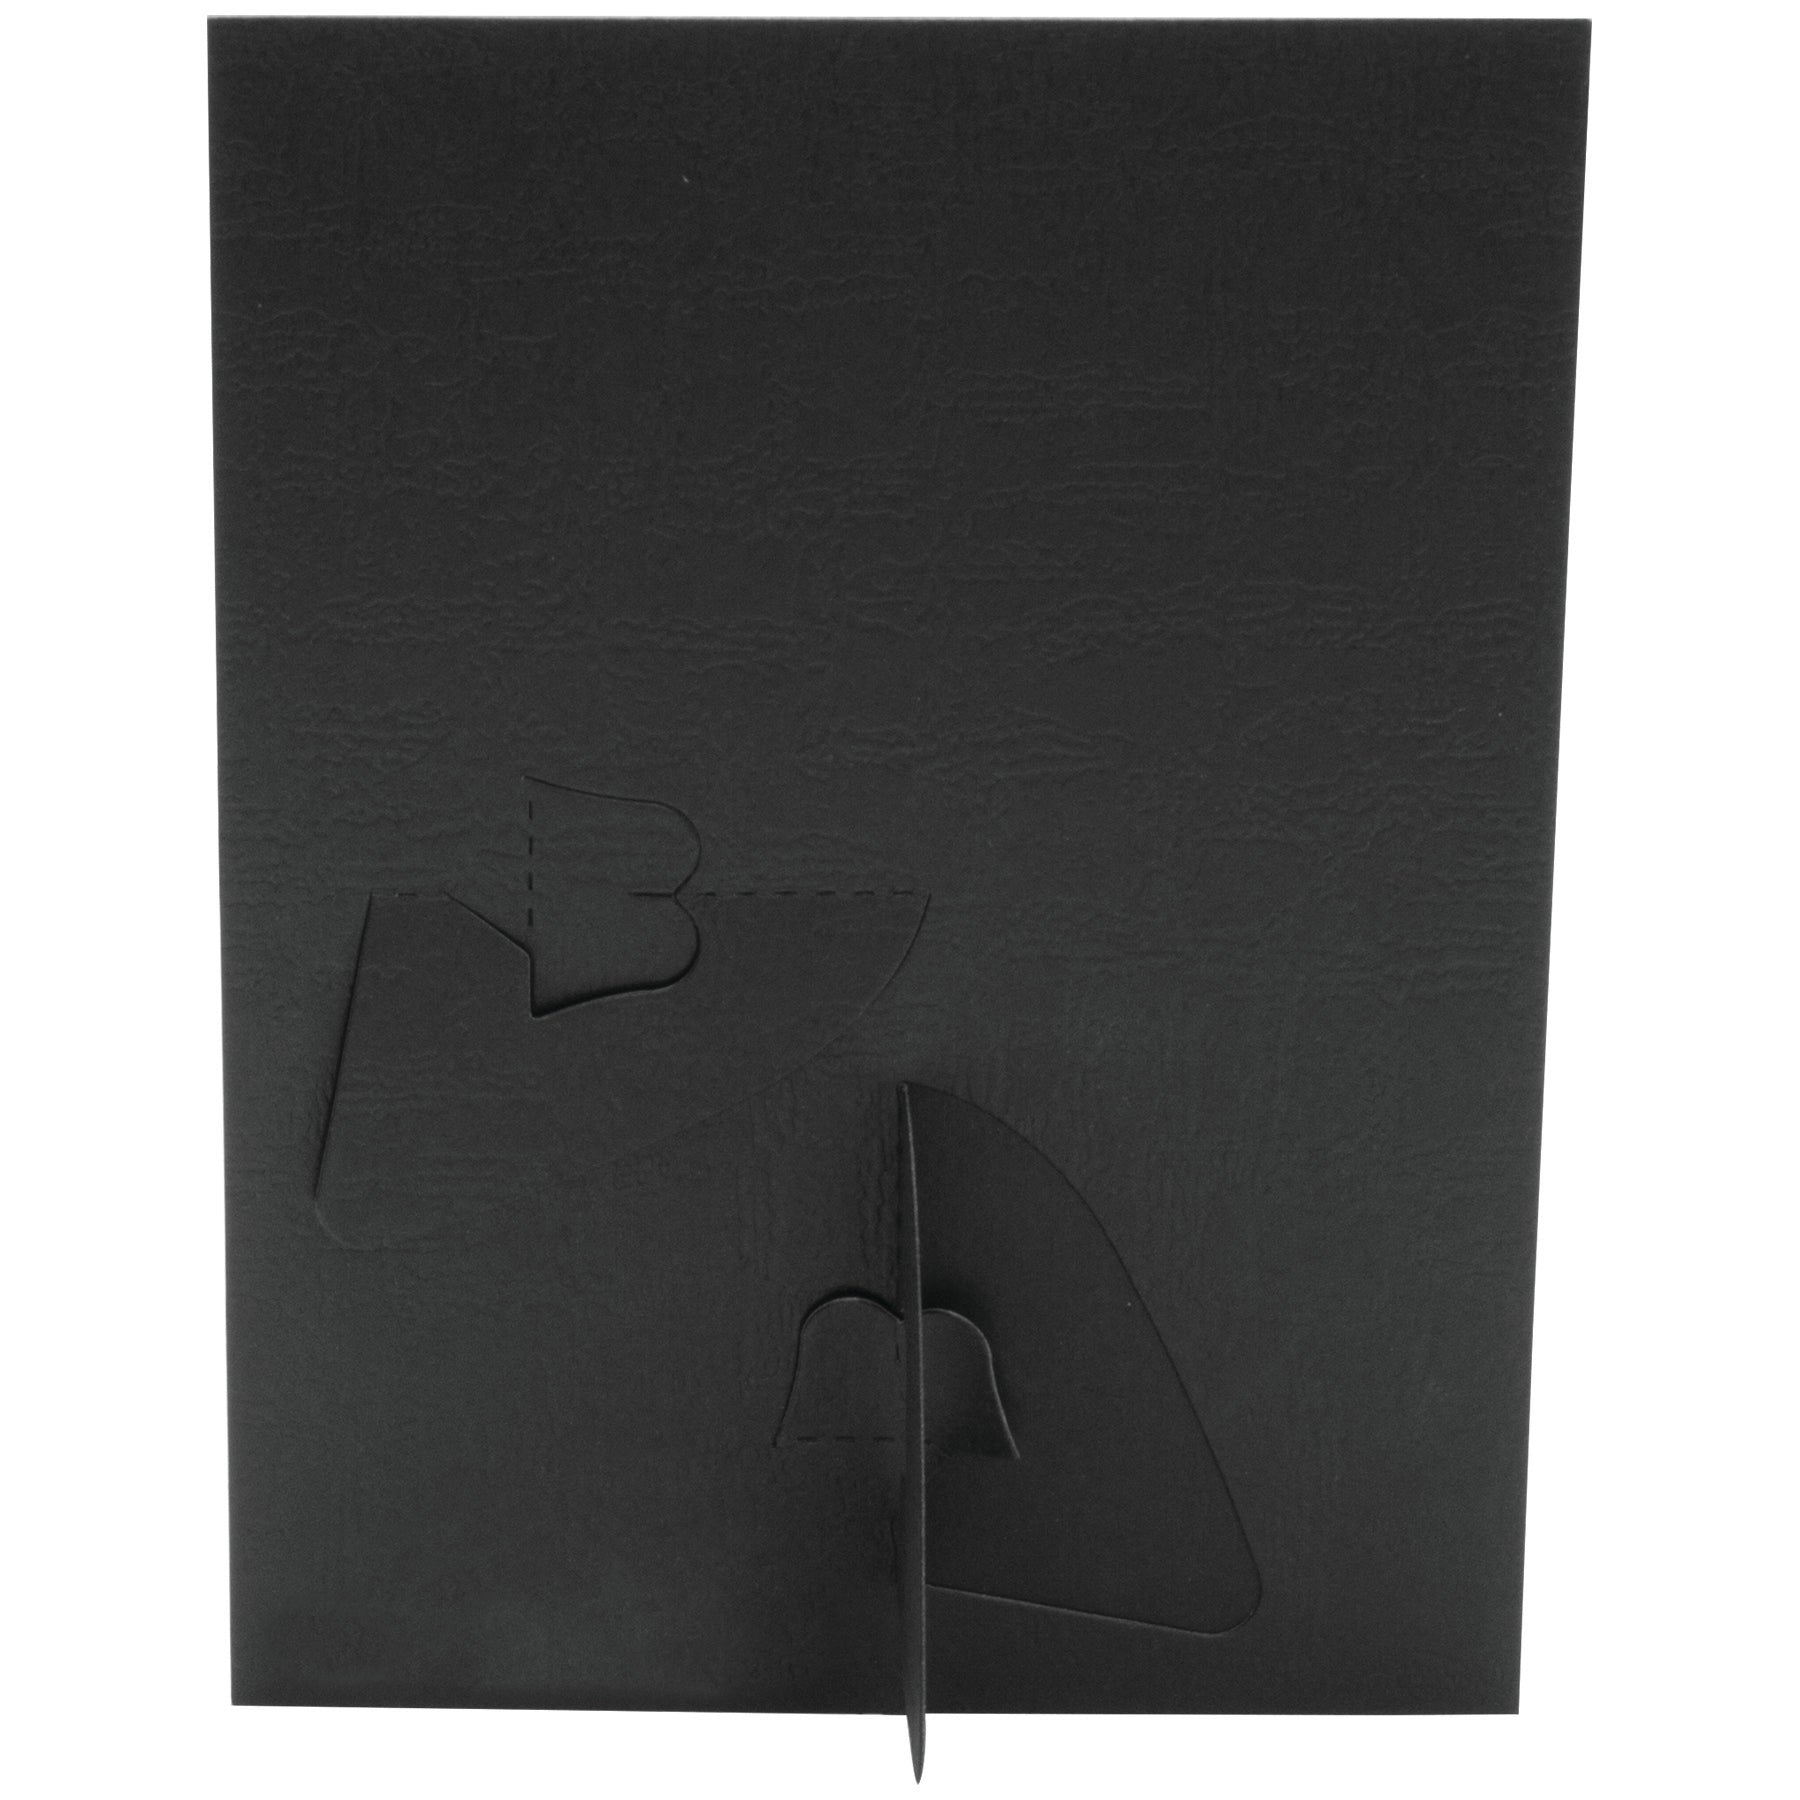 50 Pack Black Paper Picture Frames 4x6, Cardboard Photo Easels For